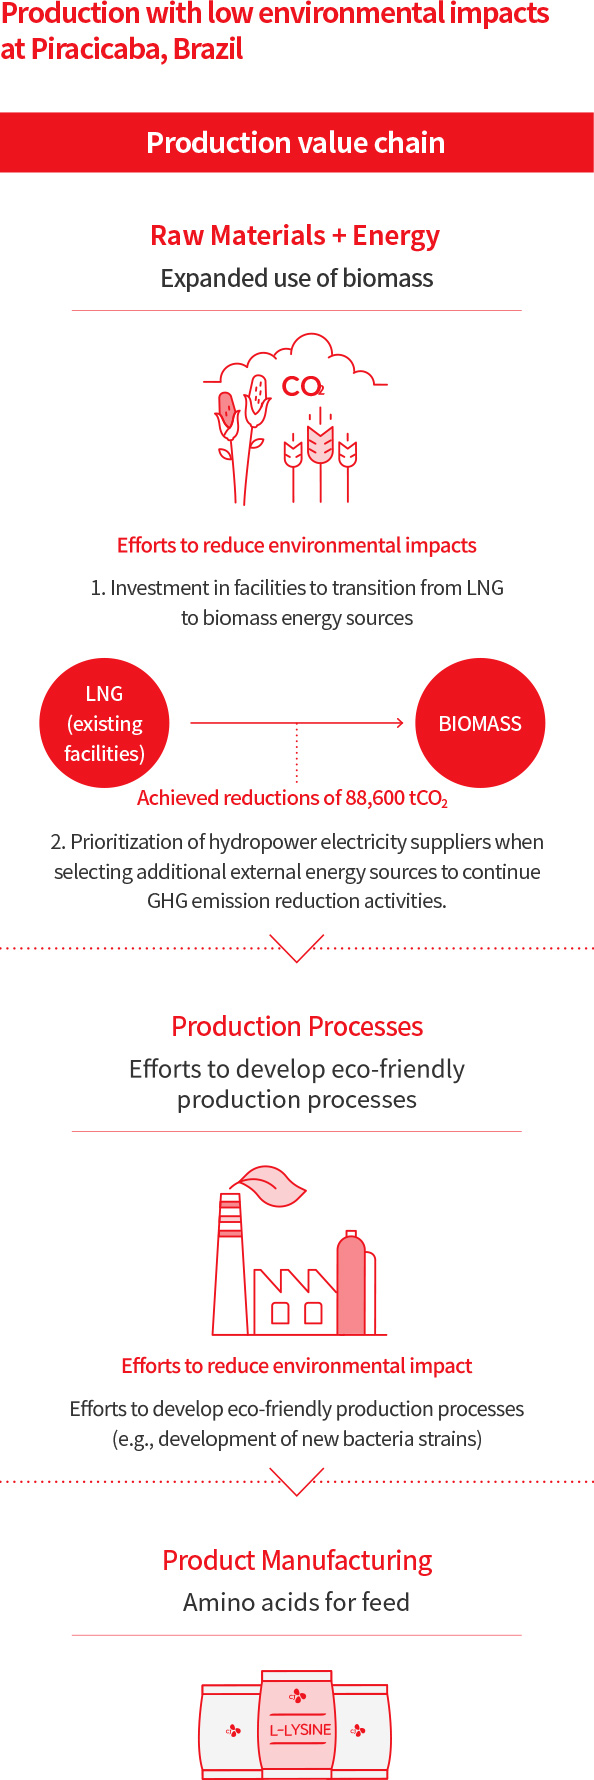 Production with low environmental impacts at Piracicaba, Brazil : Production value chain. Raw Materials + Energy, Expanded use of biomass. Efforts to reduce environmental impacts 1. Investment in facilities to transition from LNG to biomass energy sources. Achieved reductions of 88,600 tCO₂(LNG to BIOMASS) 2. Prioritization of hydropower electricity suppliers when selecting additional external energy sources to continue GHG emission reduction activities. > Production Processes. Efforts to develop eco-friendly production processes, Efforts to reduce environmental impact. Efforts to develop eco-friendly production processes(e.g., development of new bacteria strains) > Product Manufacturing, Amino acids for feed